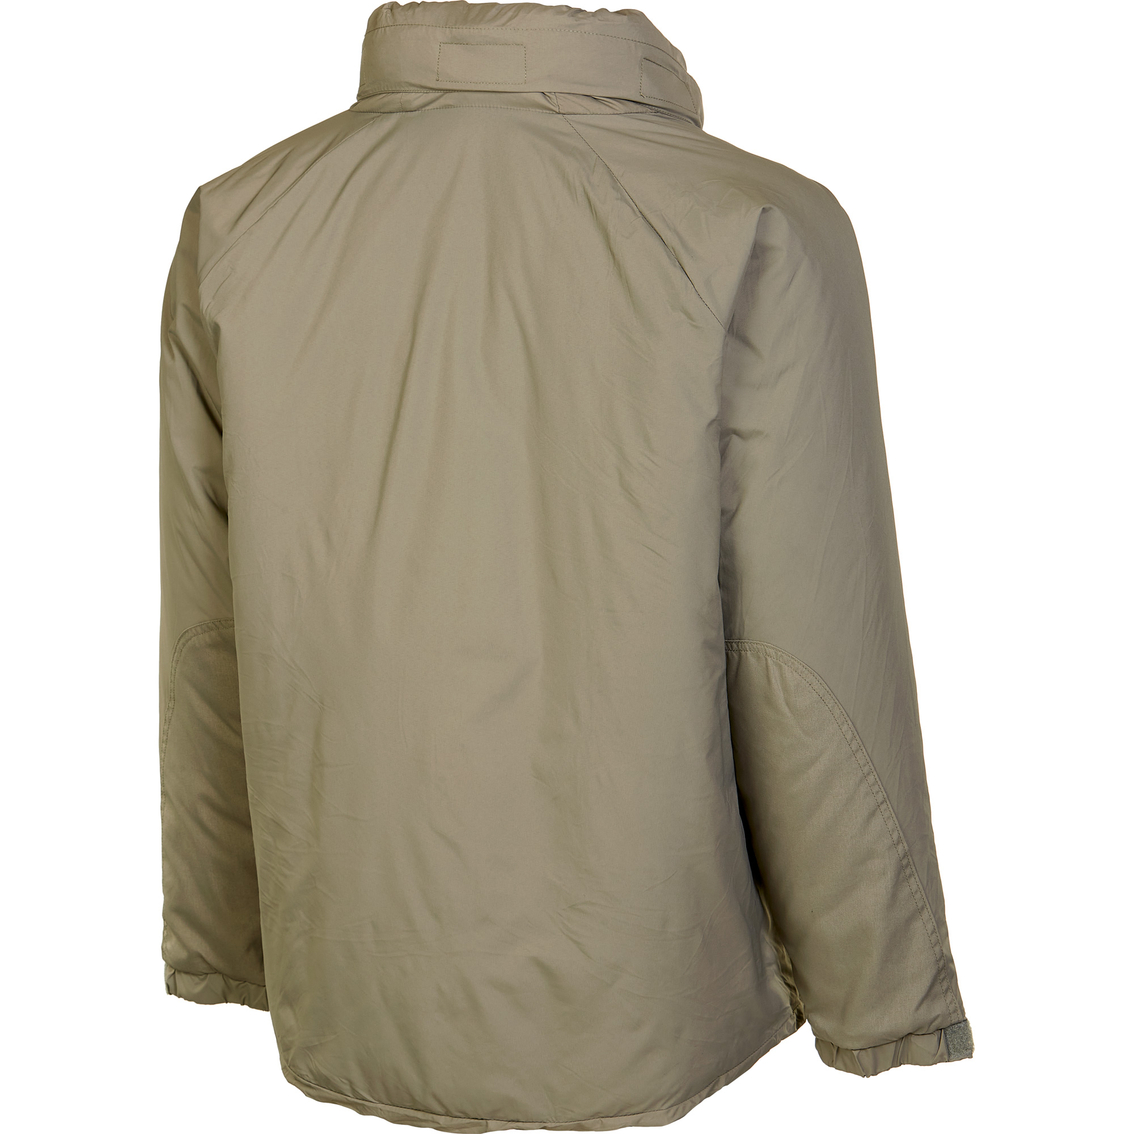 Army Air Force Layer 7 Parka - Image 3 of 3